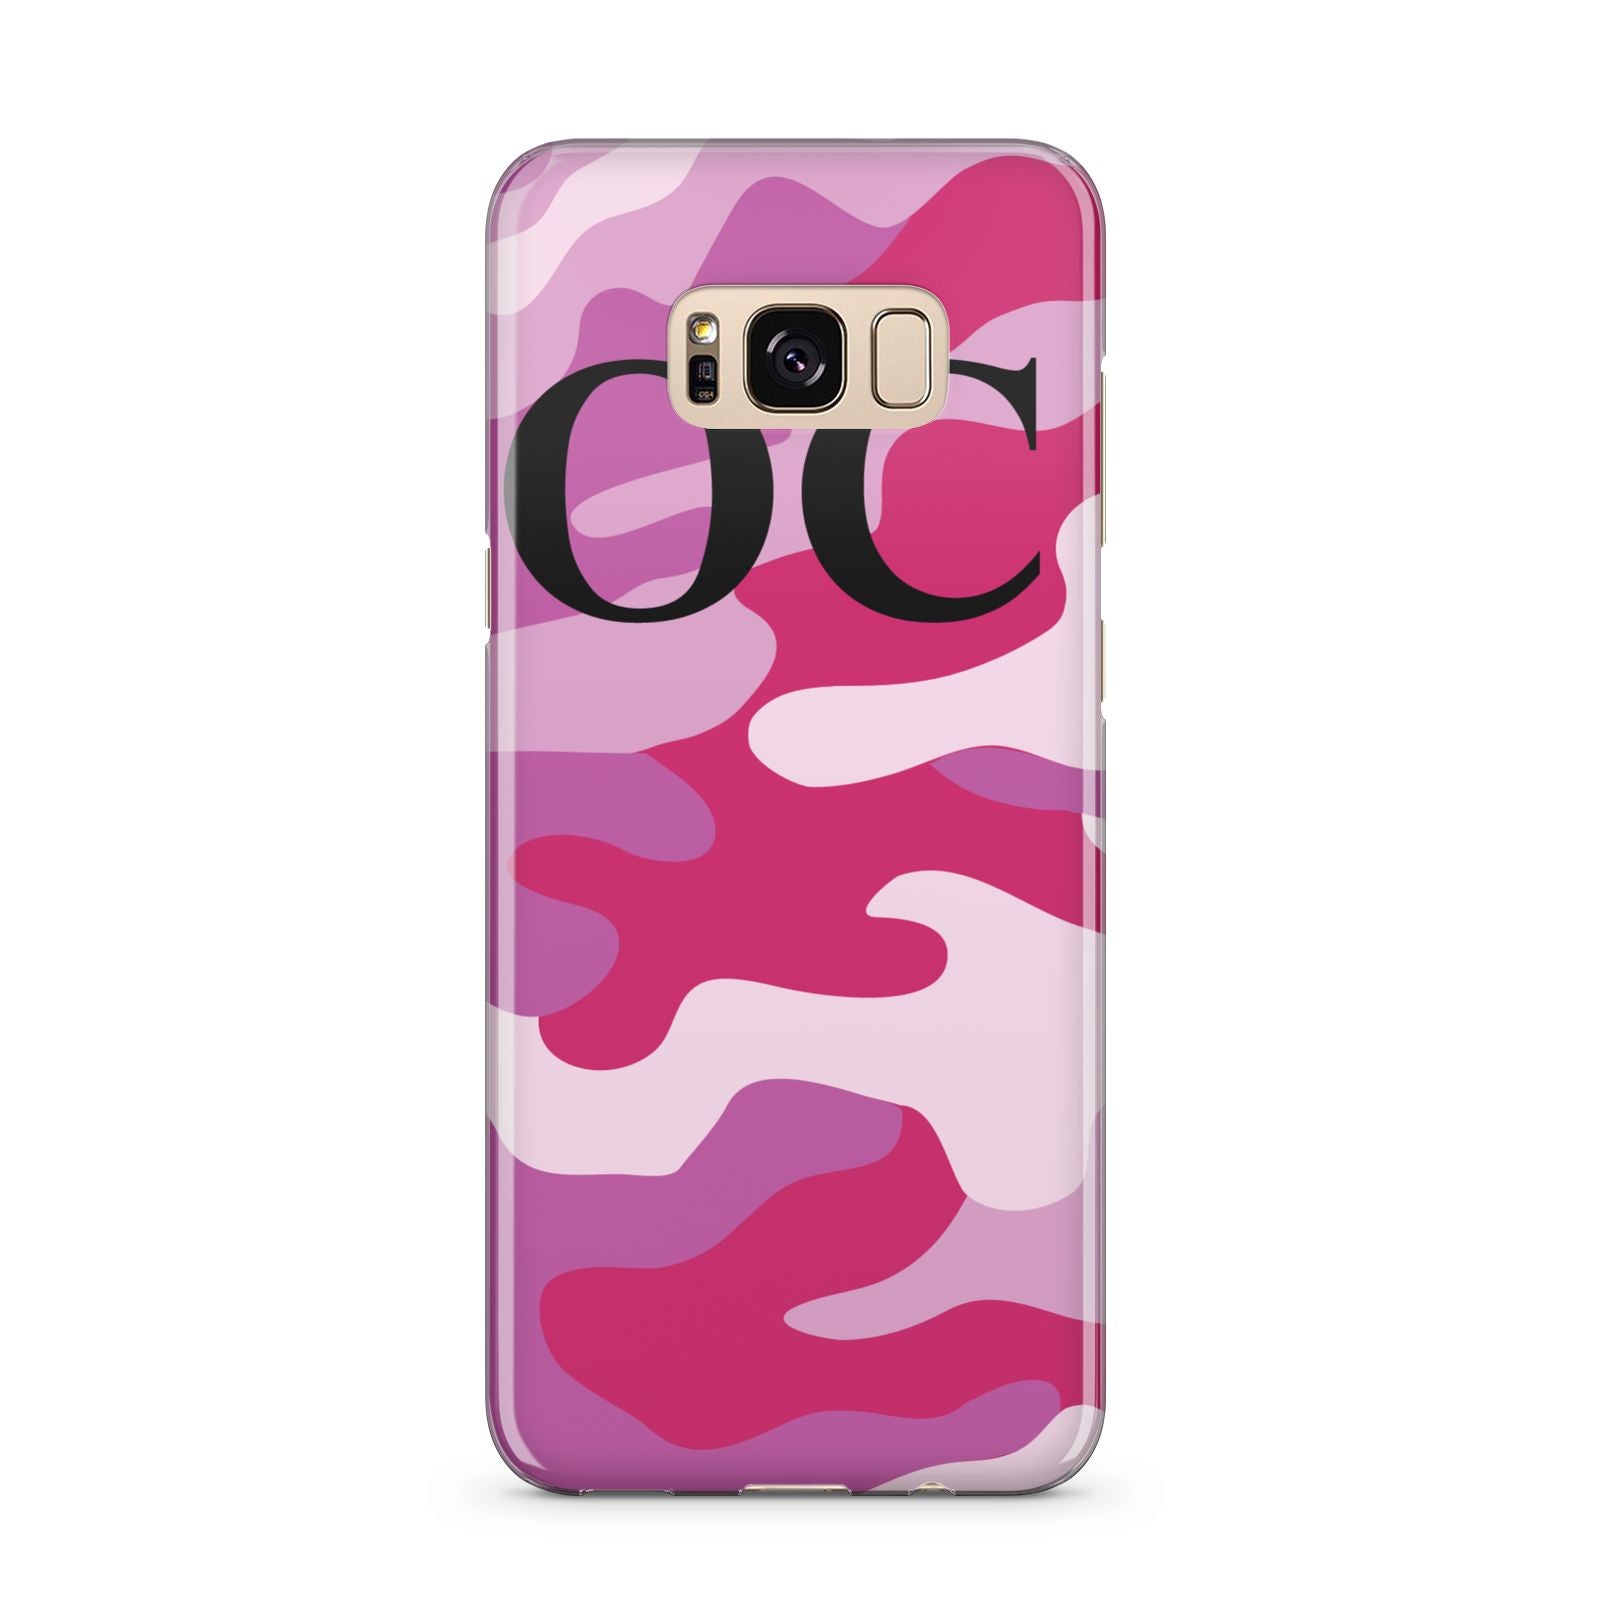 Camouflage Personalised Samsung Galaxy S8 Plus Case